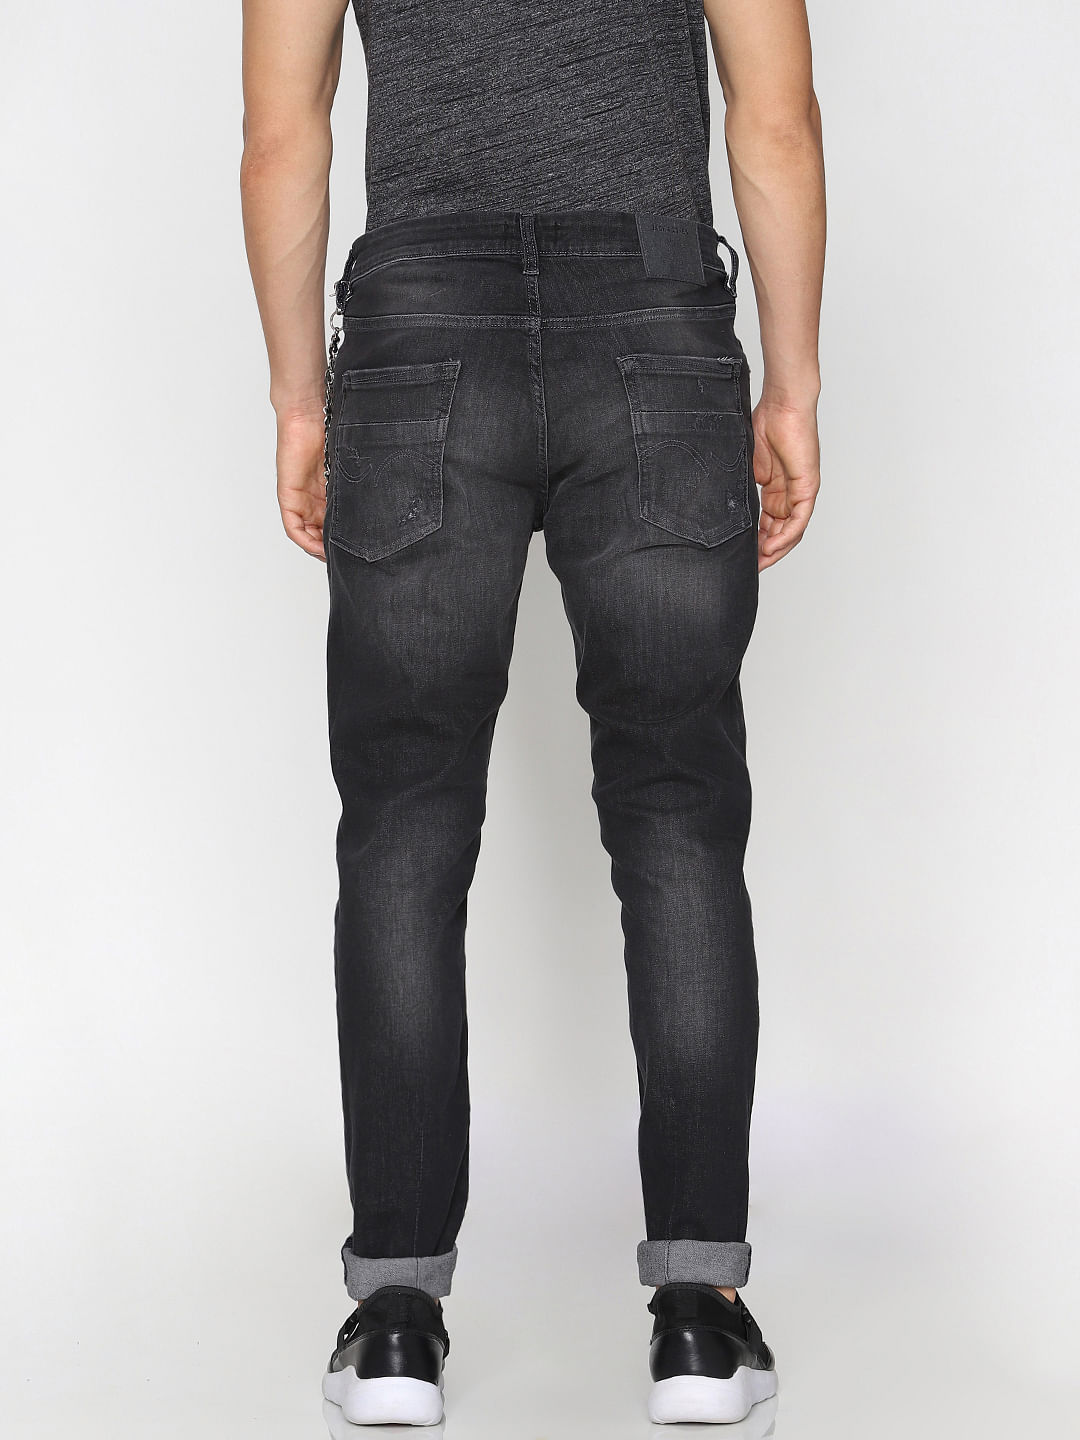 low rise gray jeans